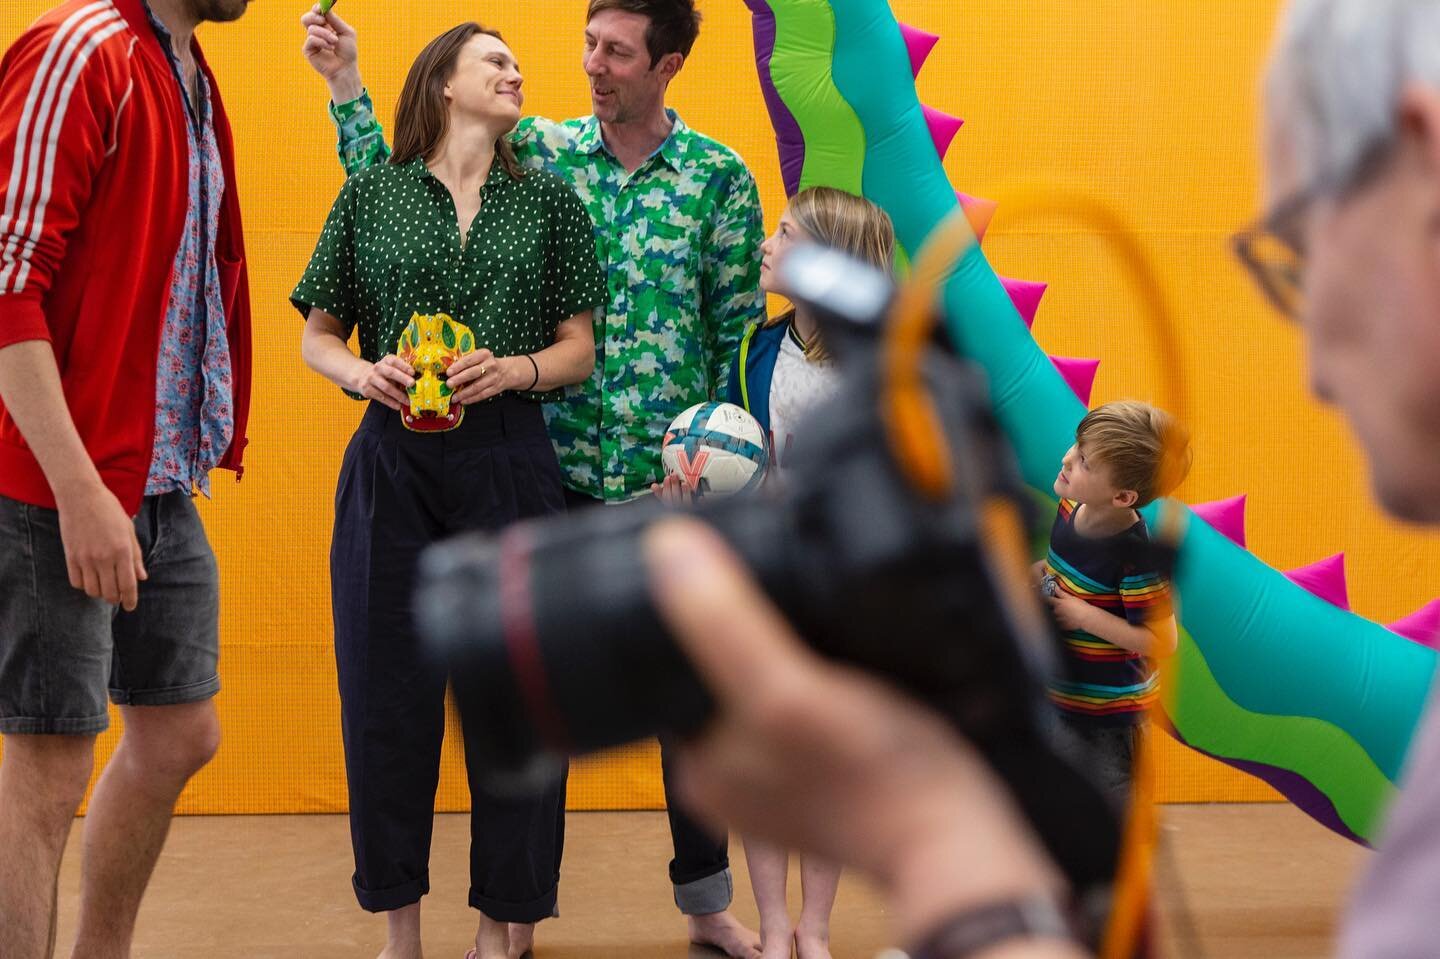 Earlier this year I took a trip to Martin Parr&rsquo;s studio in Bristol with the family for a photoshoot. We took along a little inflatable to add to the mix, I didn&rsquo;t expect Martin to get quite so involved as he did, it was a lovely moment wa